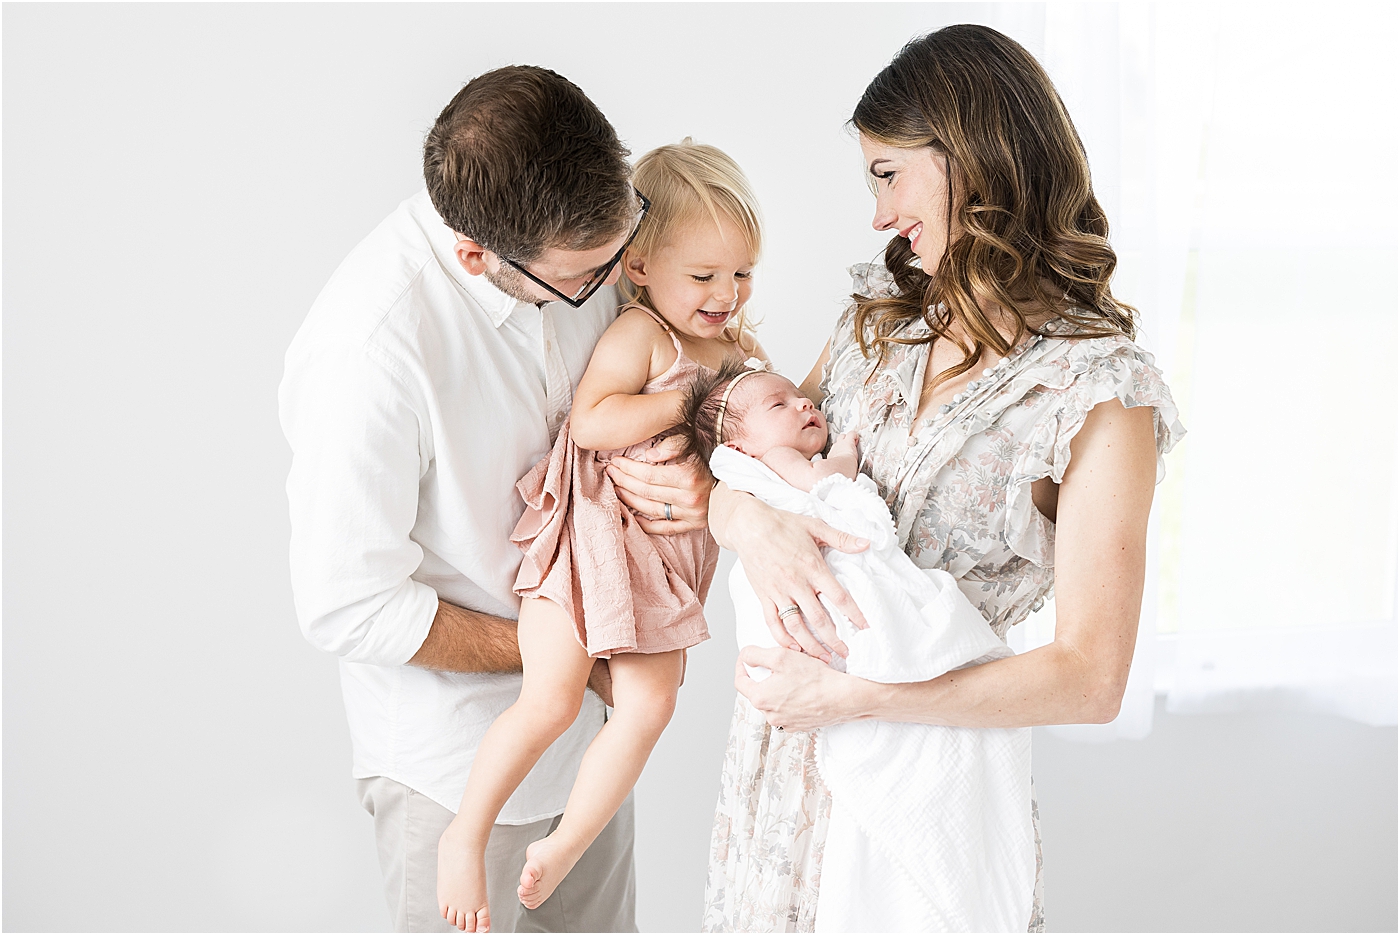 Family of four in studio for newborn photos with Fishers newborn baby photographer, Lindsay Konopa Photography.